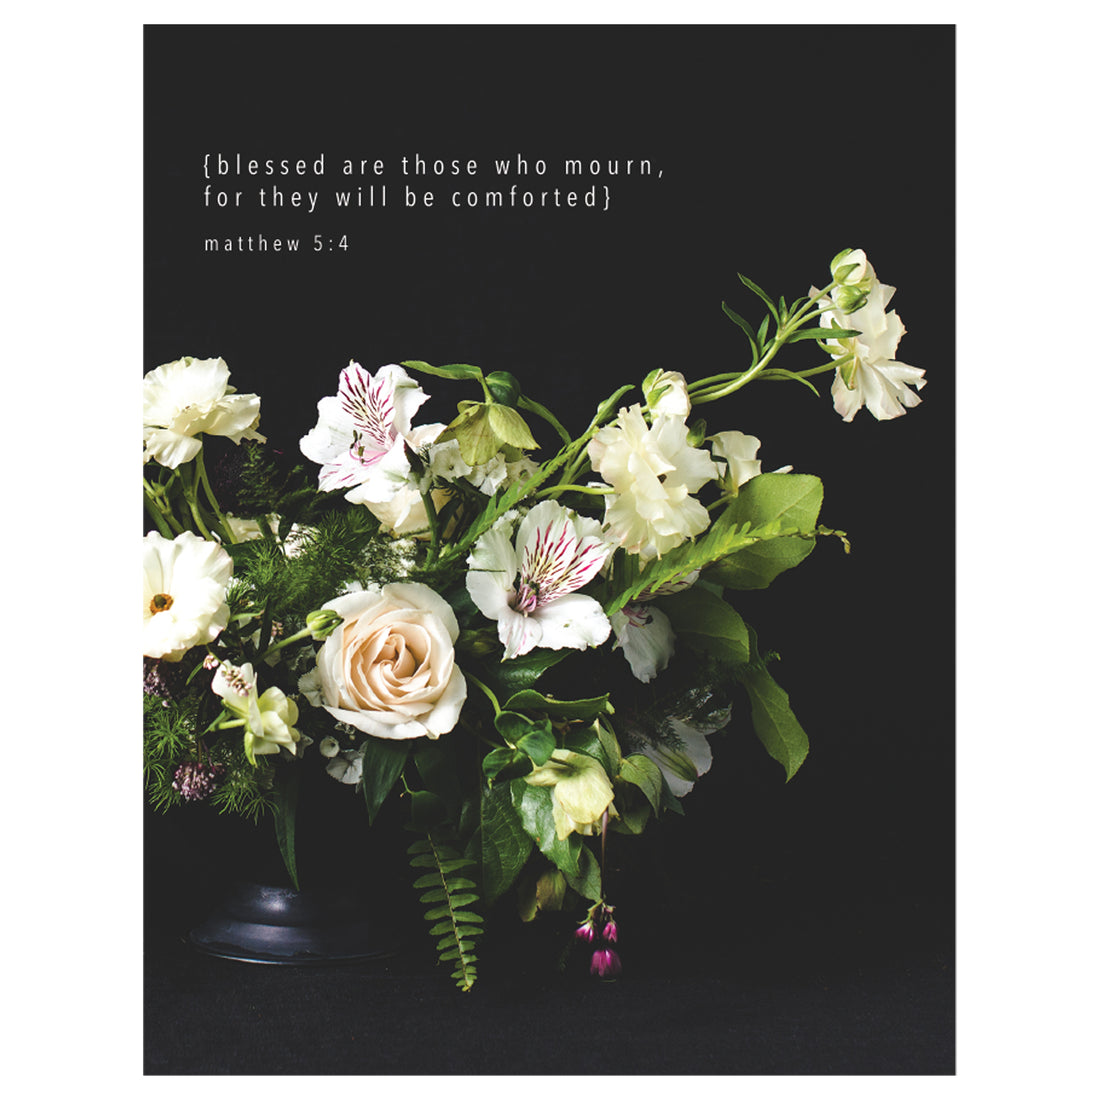 A photo of a bouquet of white flowers with vibrant green leaves in a black vase on a black background, with &quot;{blessed are those who mourn, for they will be comforted} matthew 5:4&quot; printed in white above the flowers.